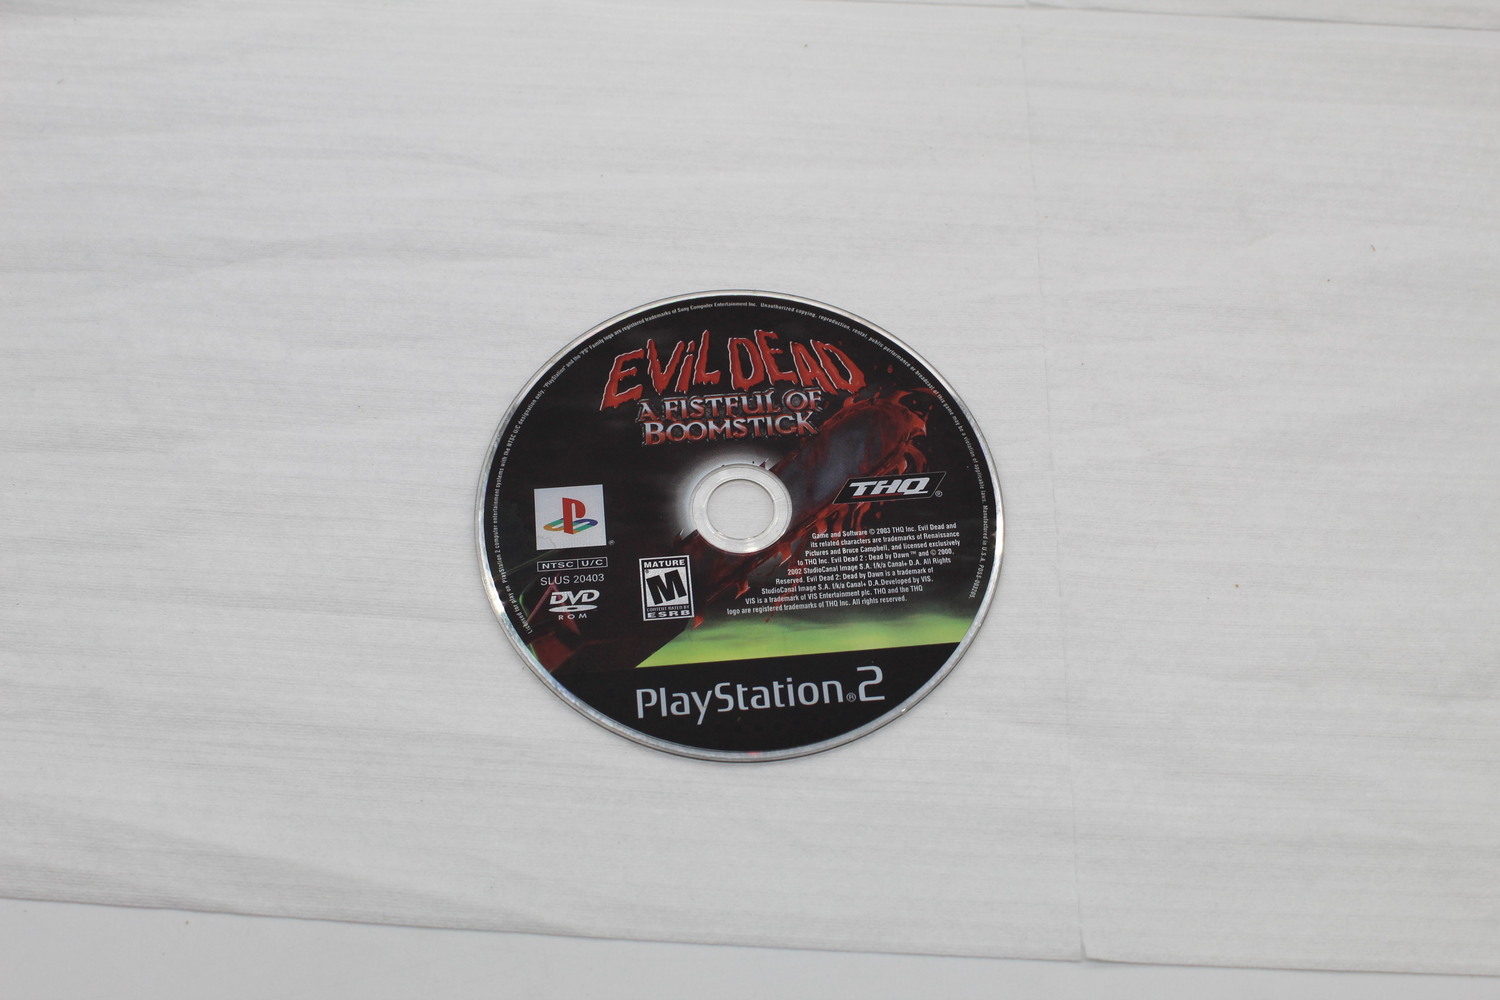  Evil Dead, A Fistful Of Boomstick Complete PS2 Game, Manual, and Cover Art